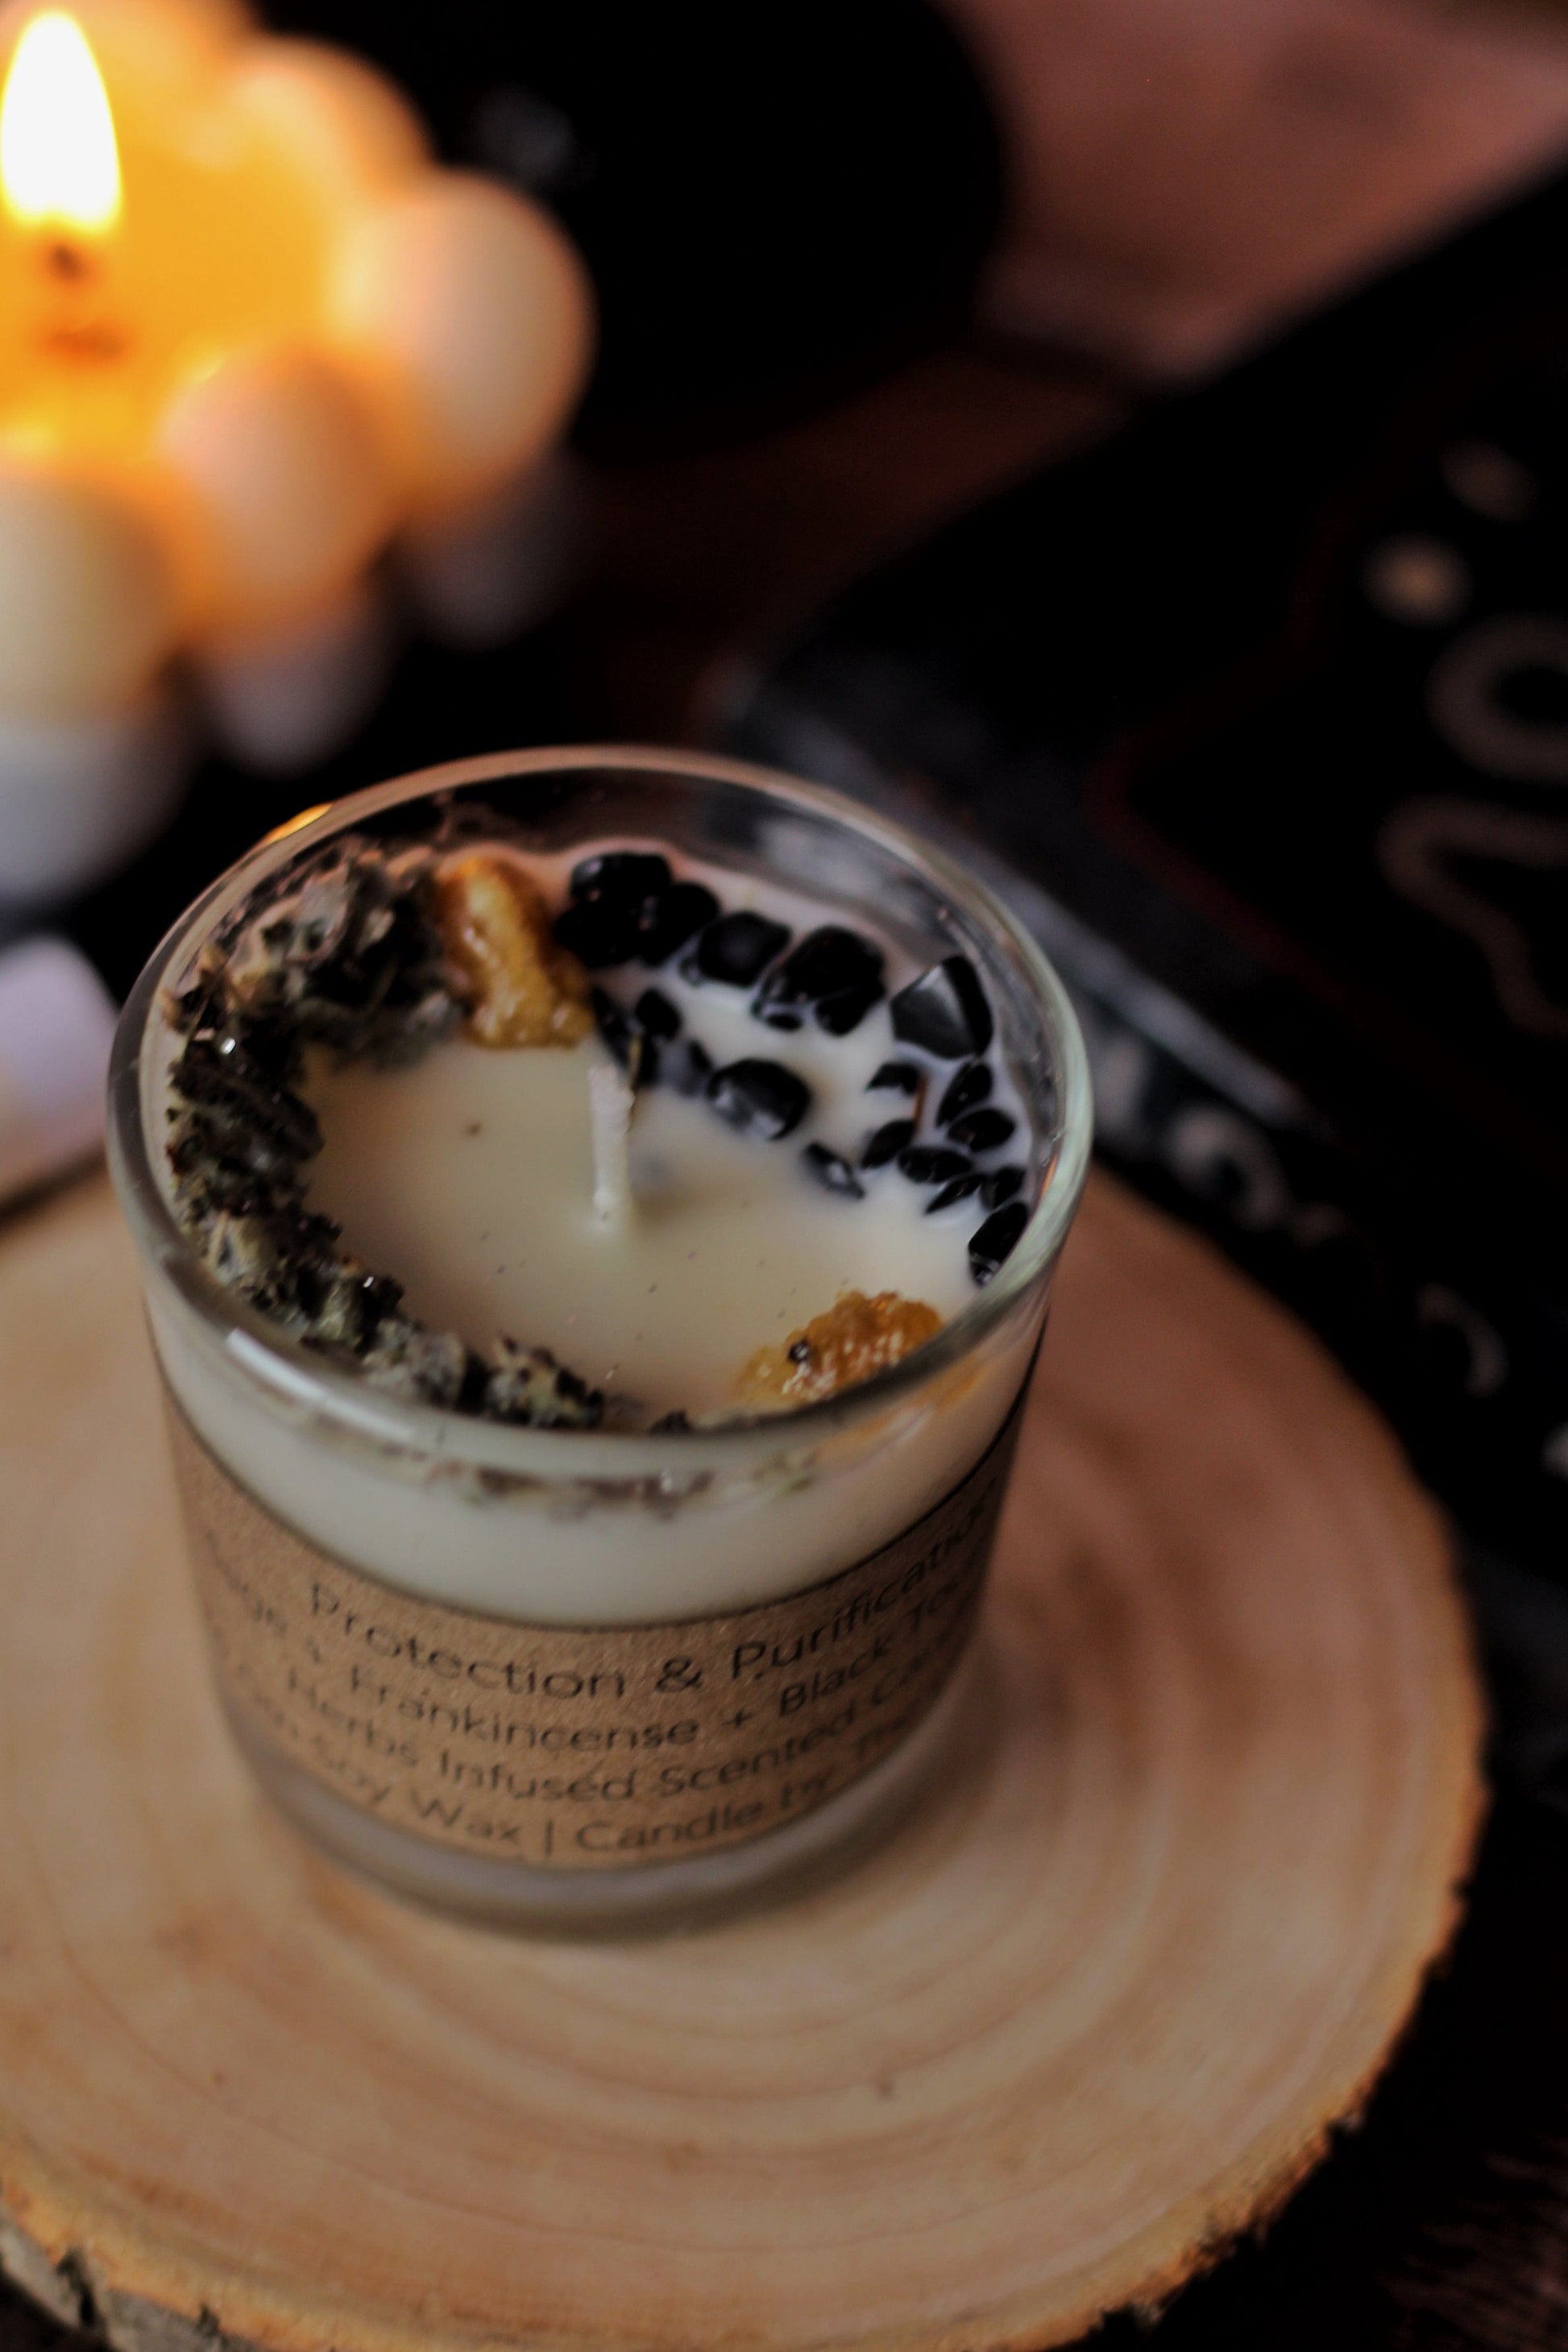 Protection & Purification Candle